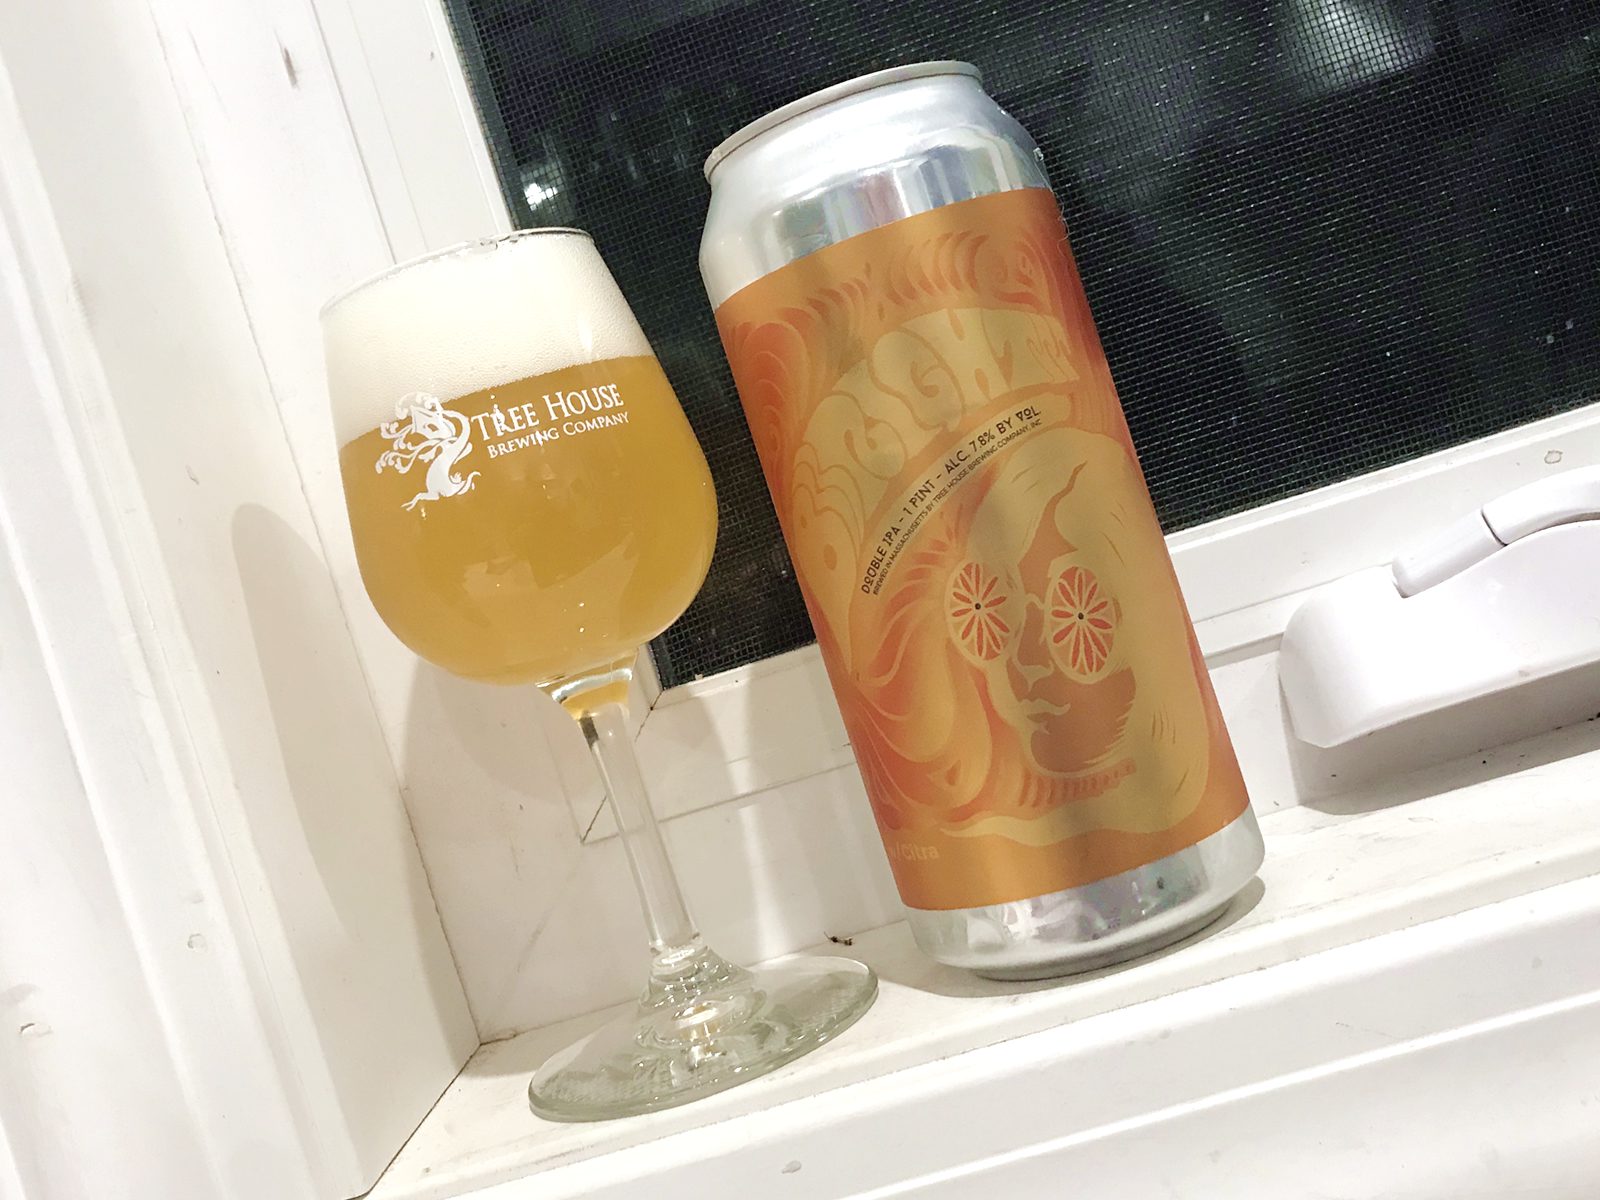 Tree House Brewing Company: Bright with Citra